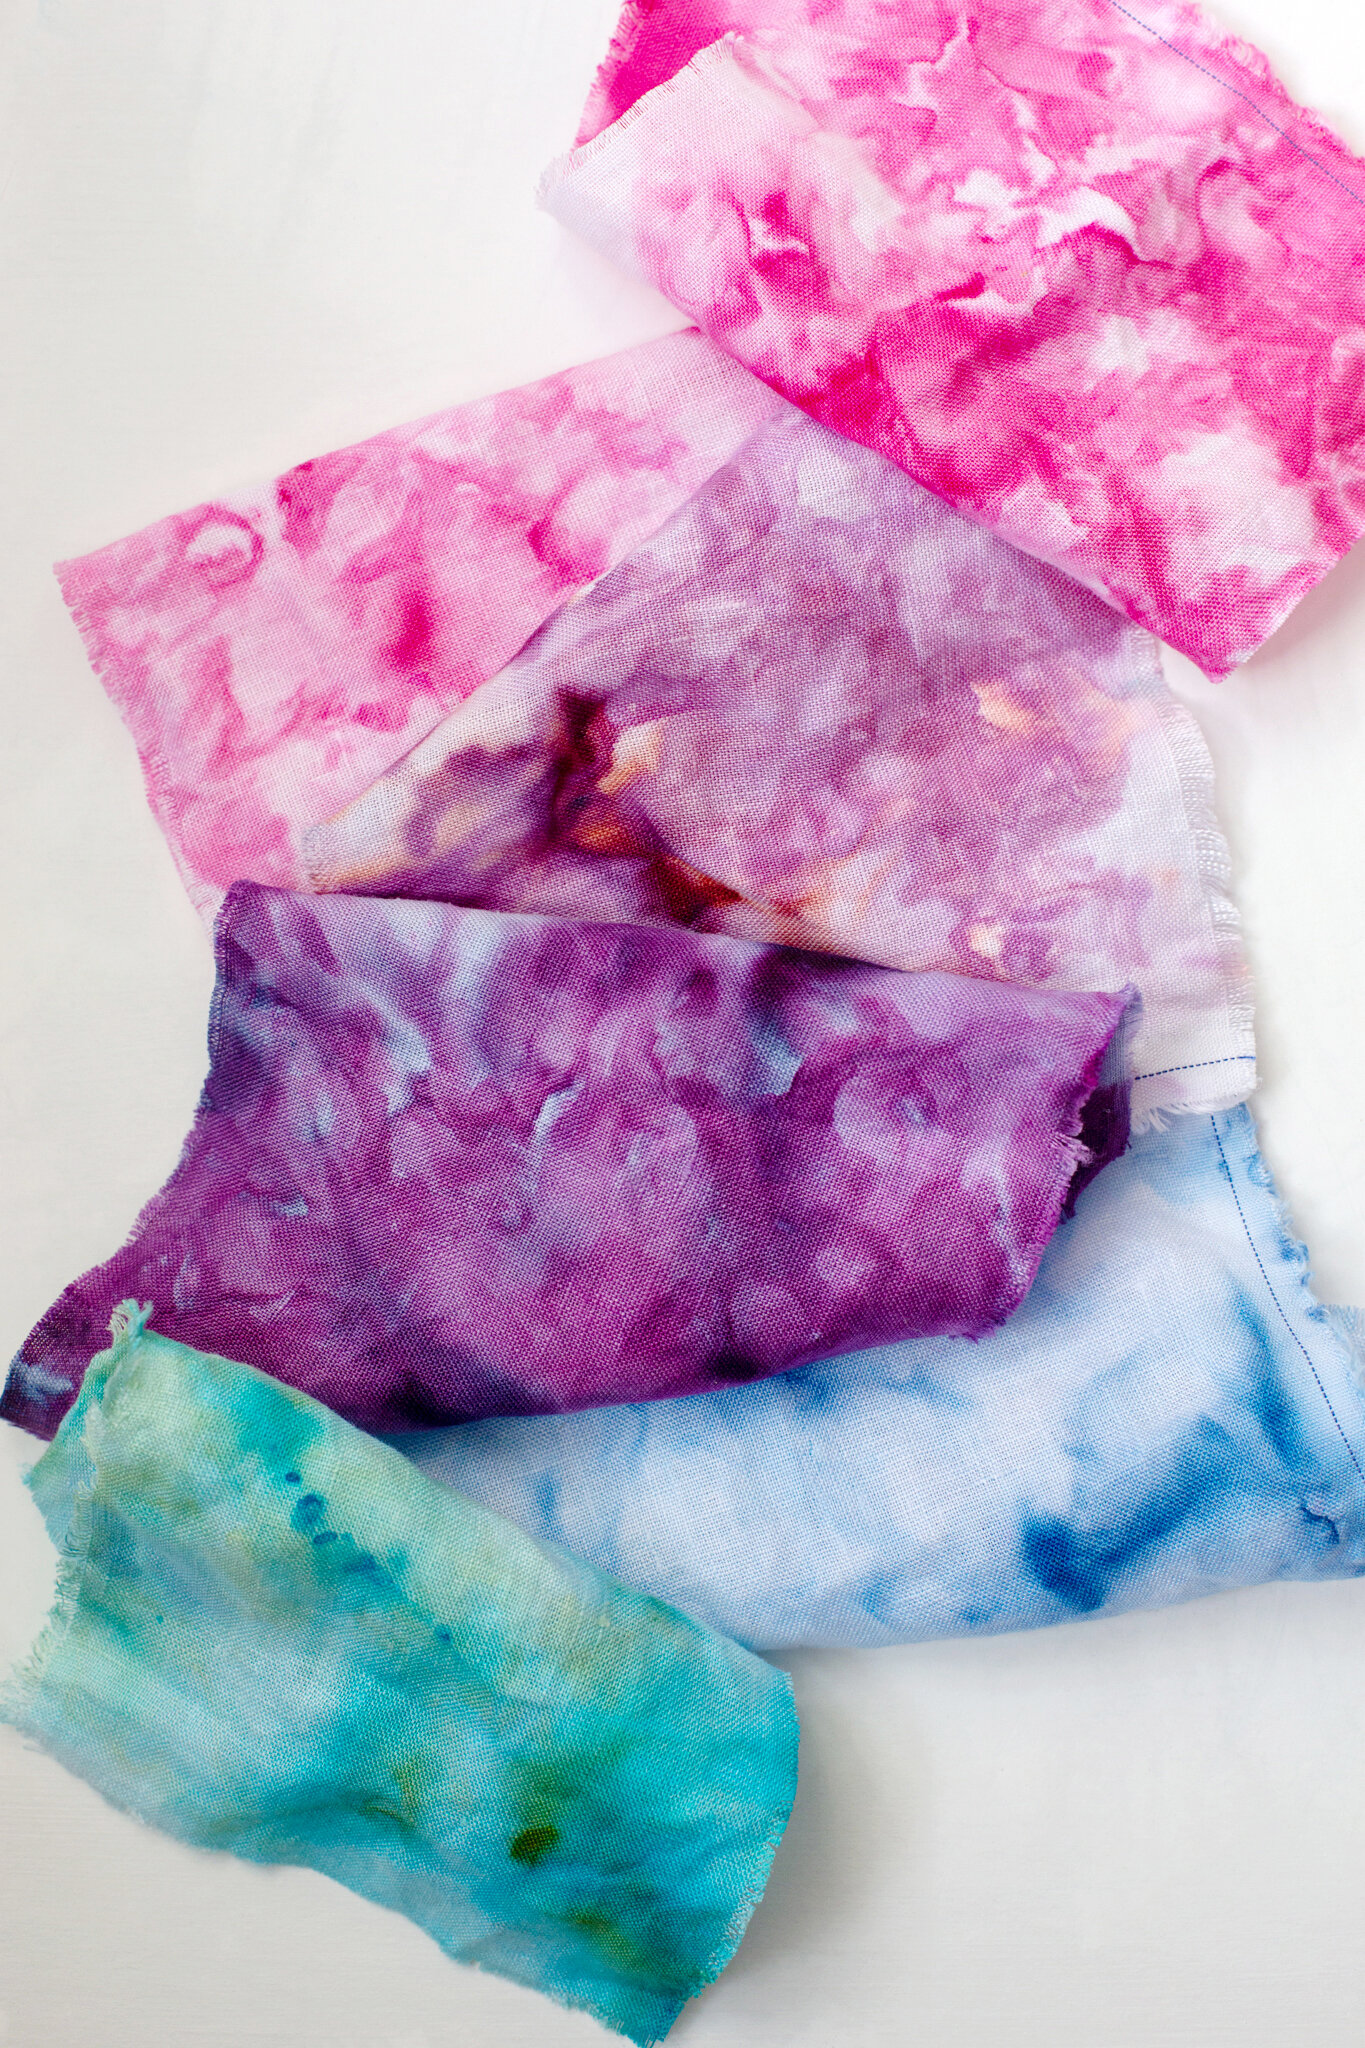 Can I save soda ash mixtures for other tie dying batches in the